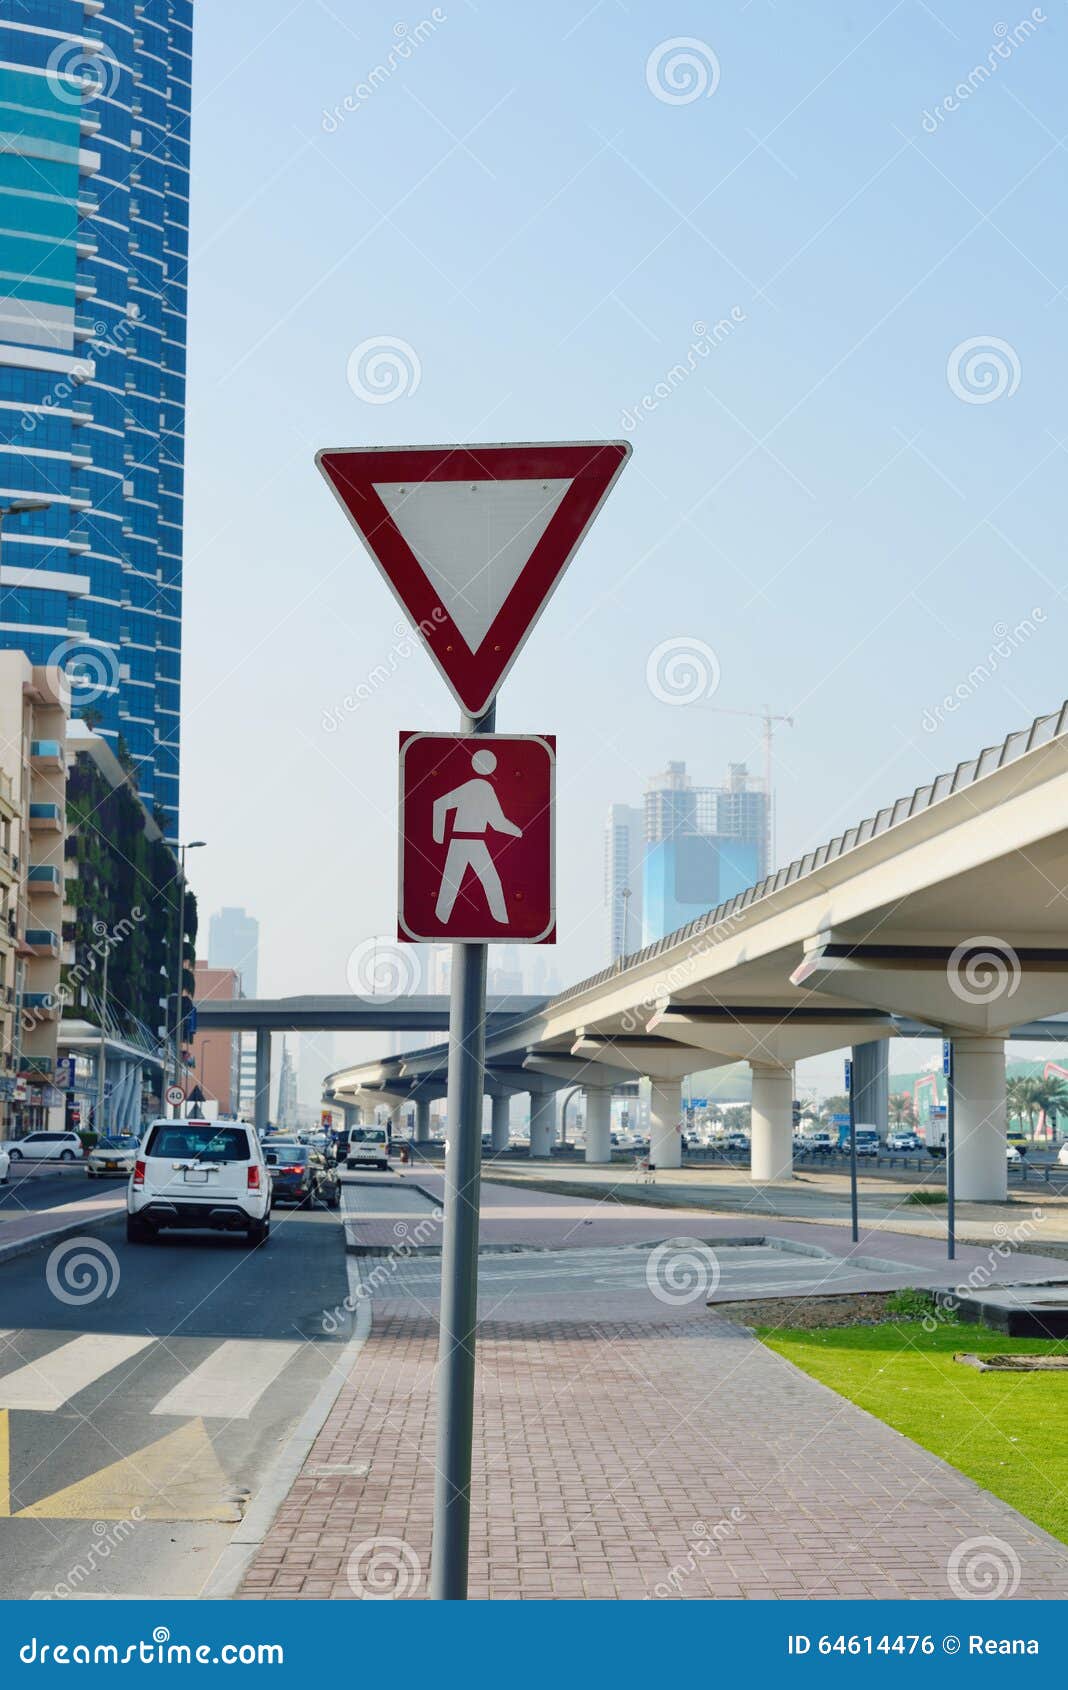 Give way to pedestrians stock photo. Image of regulation - 64614476